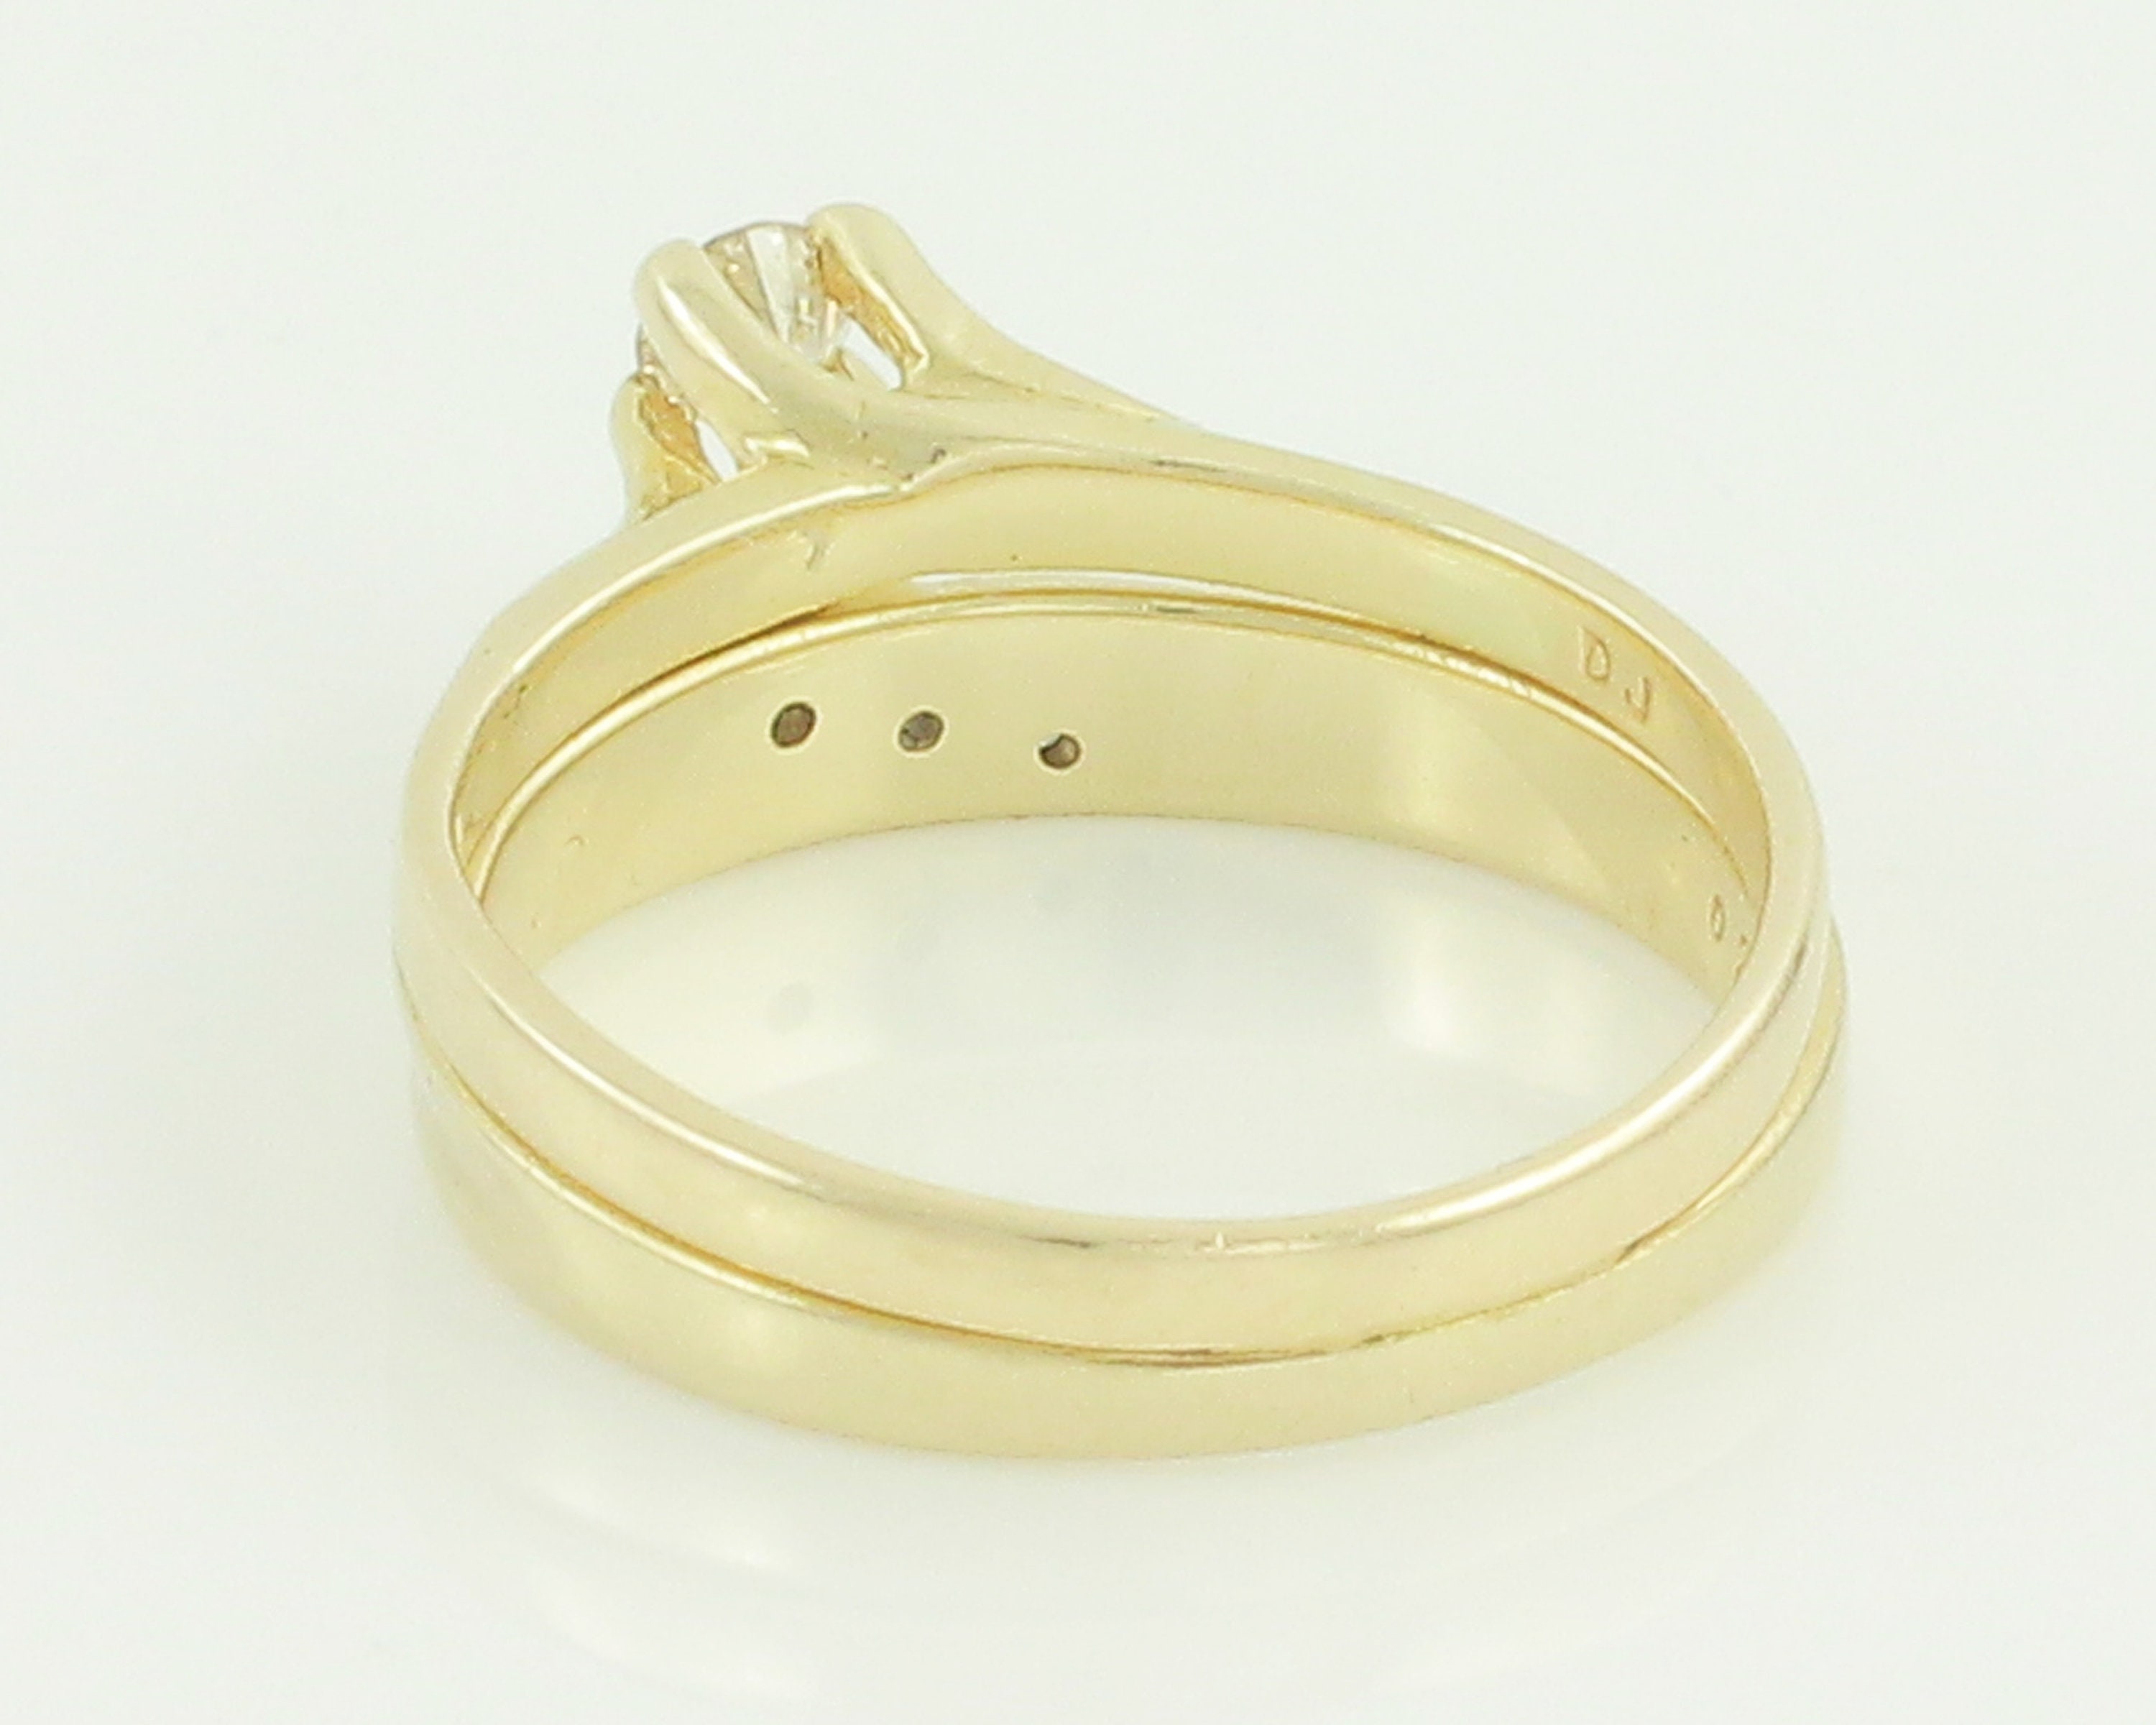 Areezay Gold - New Arrival Of Light Weight Gold Rings 3 to 4-Grams 22-carat  Gold !! Life Is To Short To Wear Boring Jewelry !! Get Ride Off From Your  Old Wasted